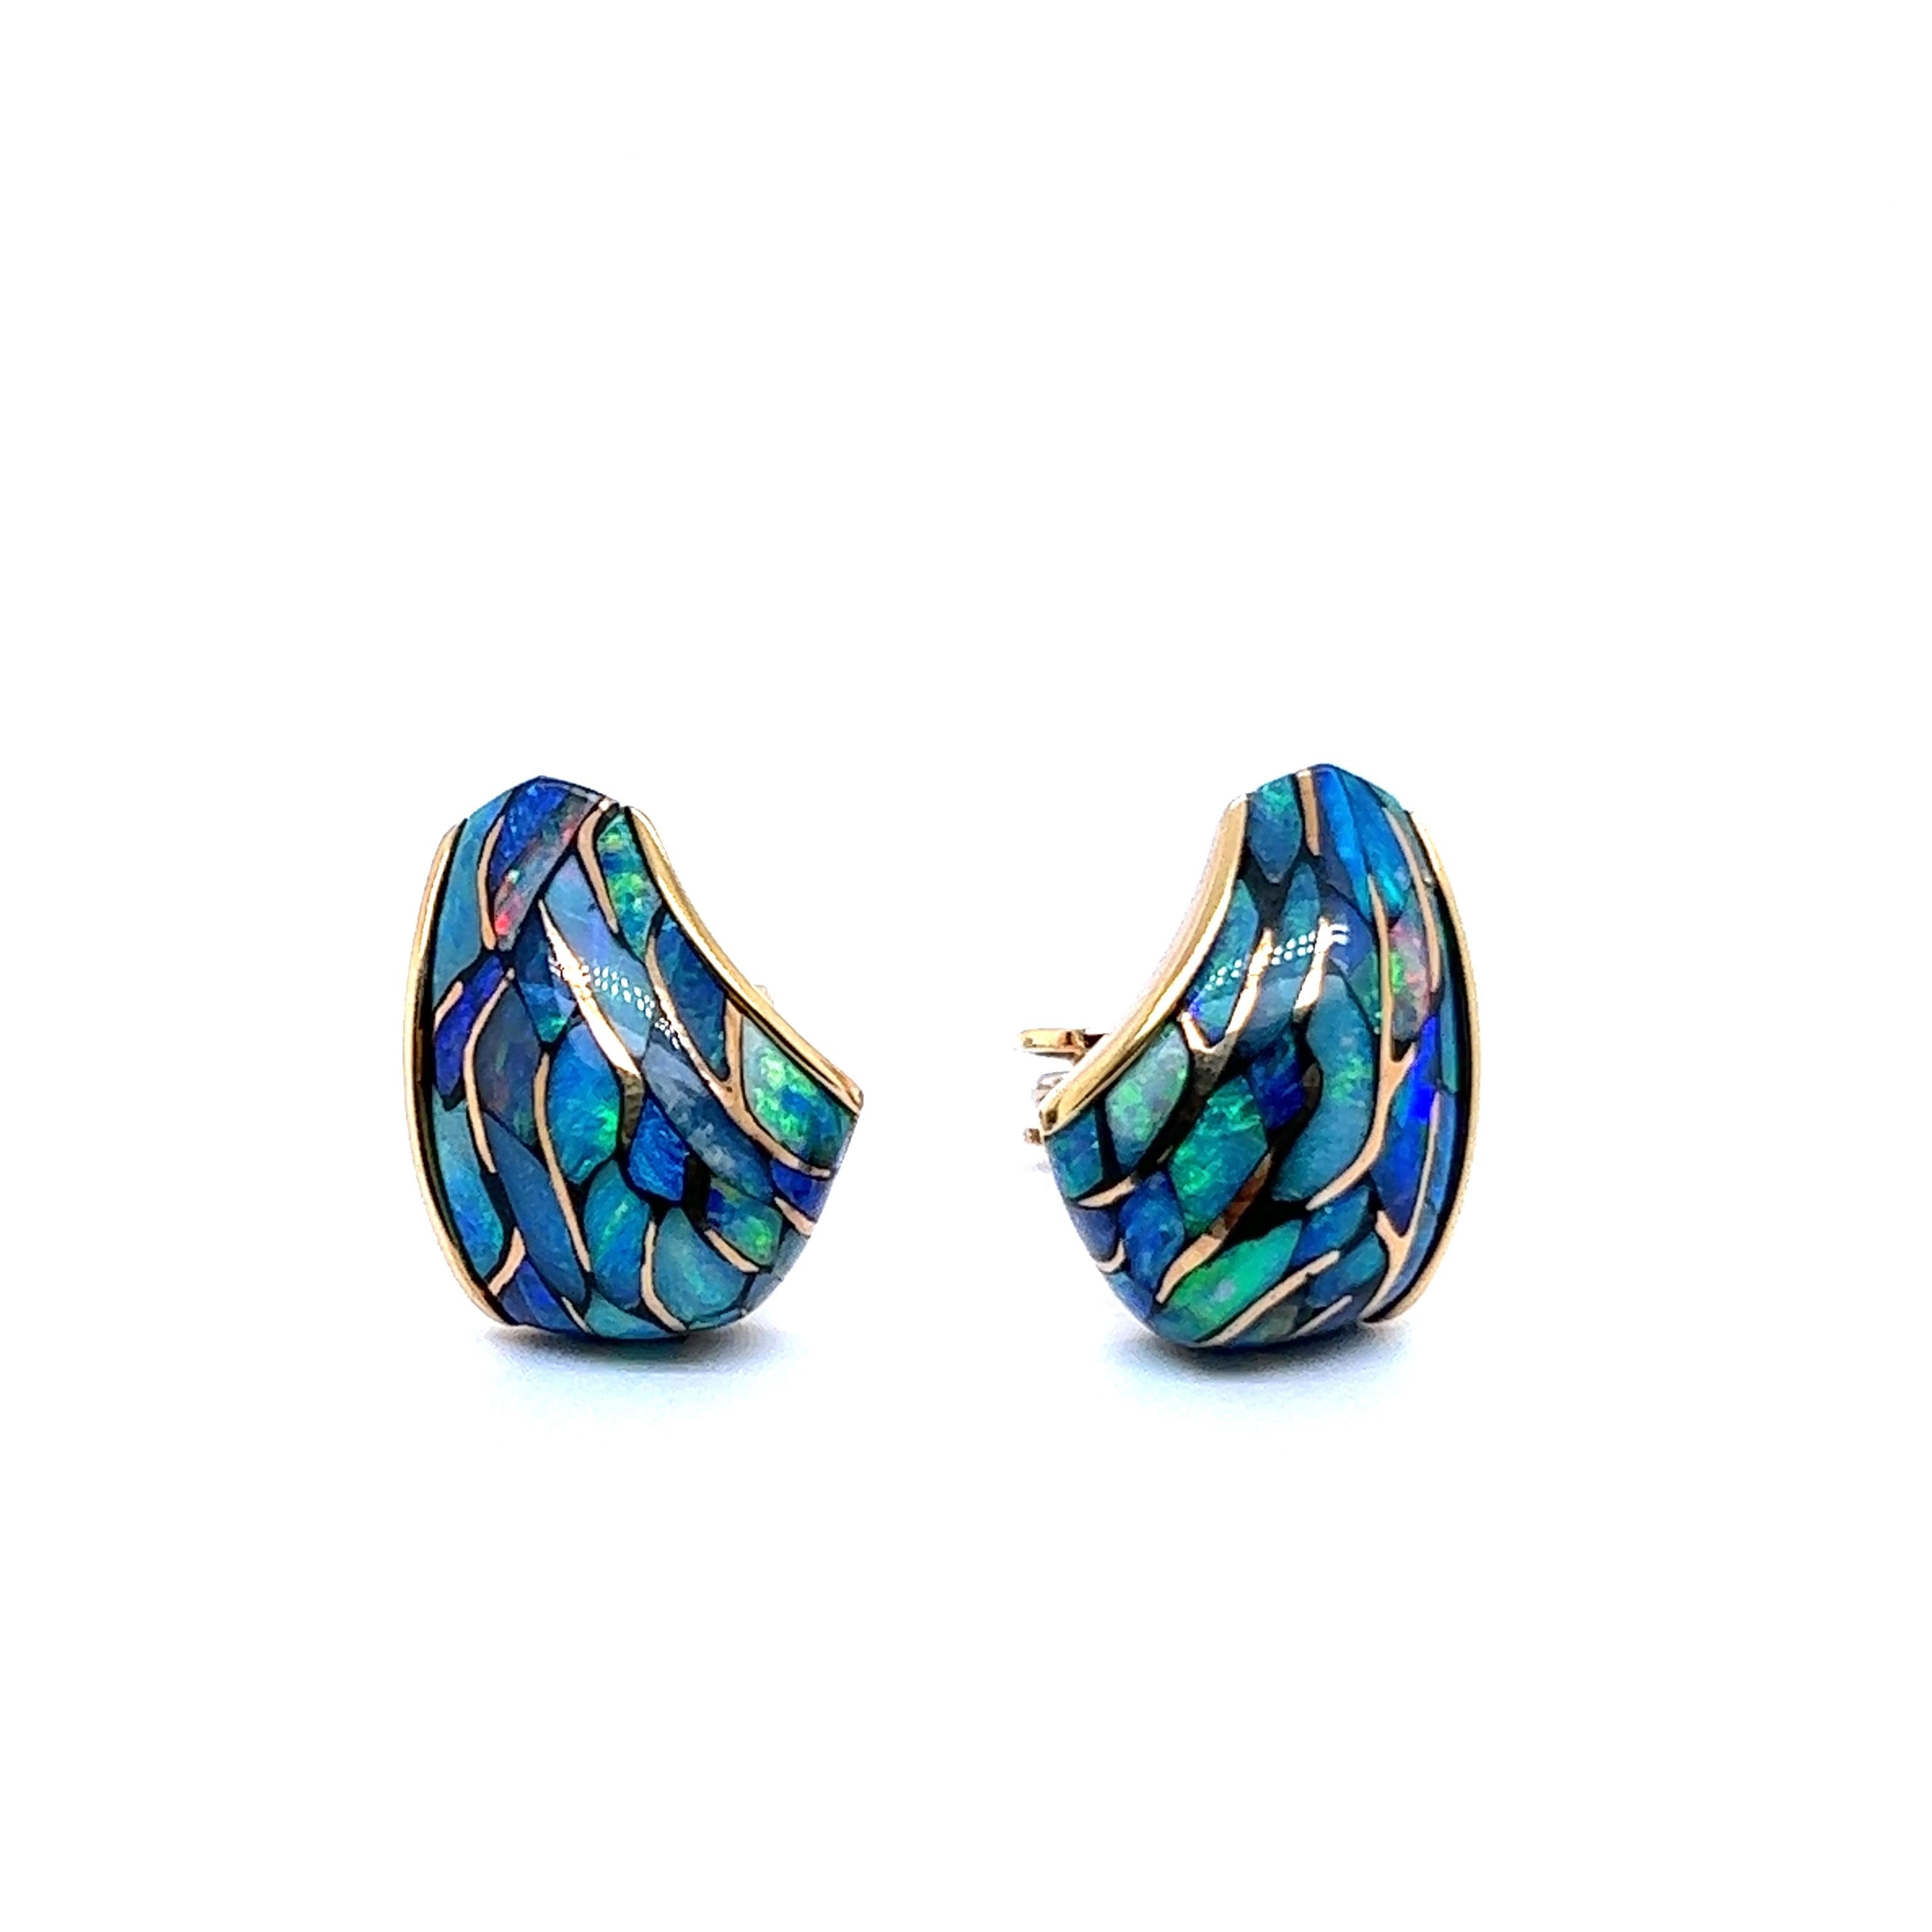 A riot of colour and flare - fiery black opal earrings in exquisite rose gold. 

Black opal is a precious gemstone with a long history rooted in Australia. Indigenous Australians have revered opals for centuries, considering them sacred and imbued